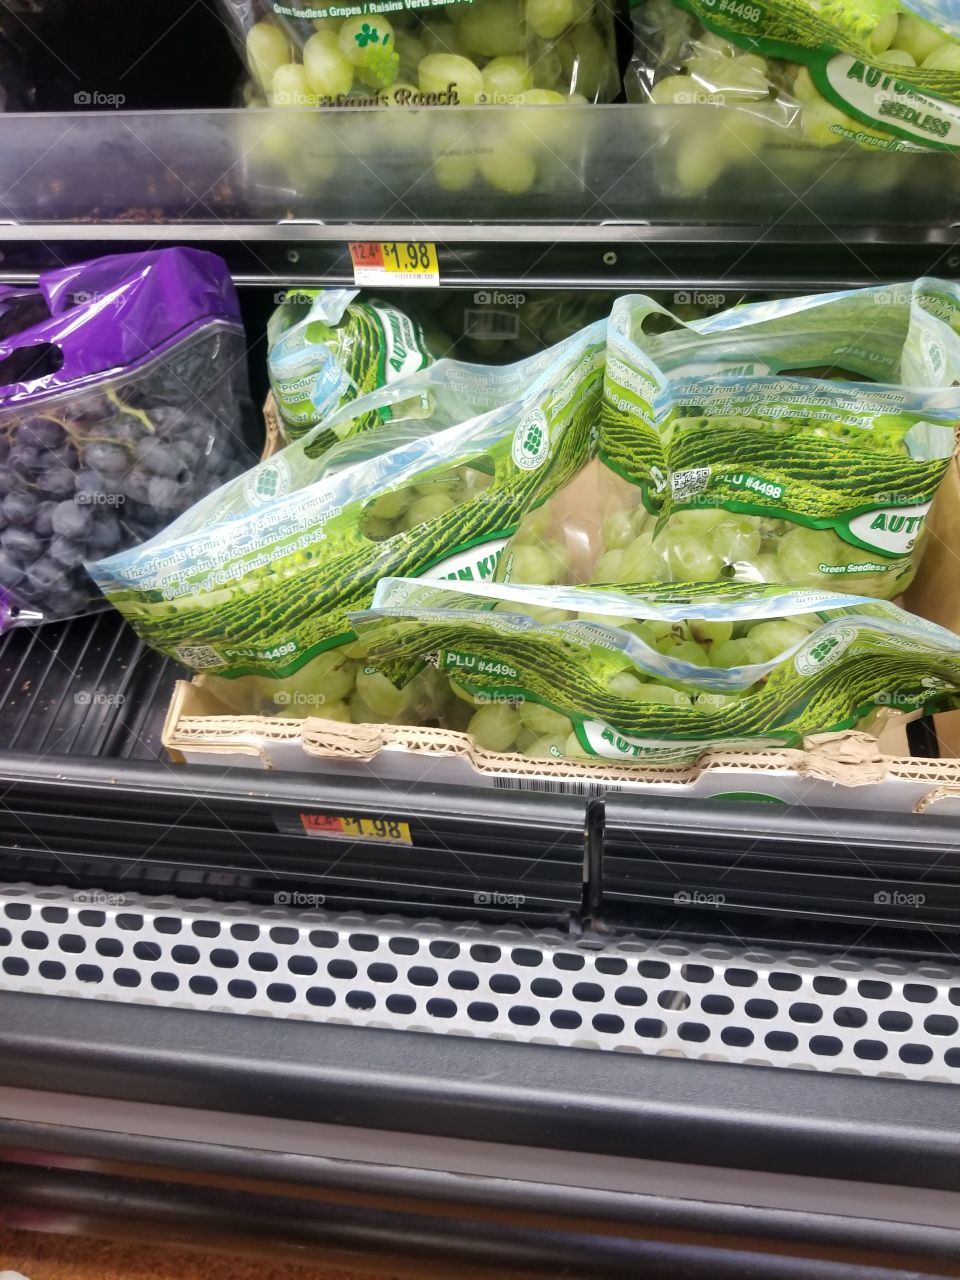 Grocery shopping for grapes